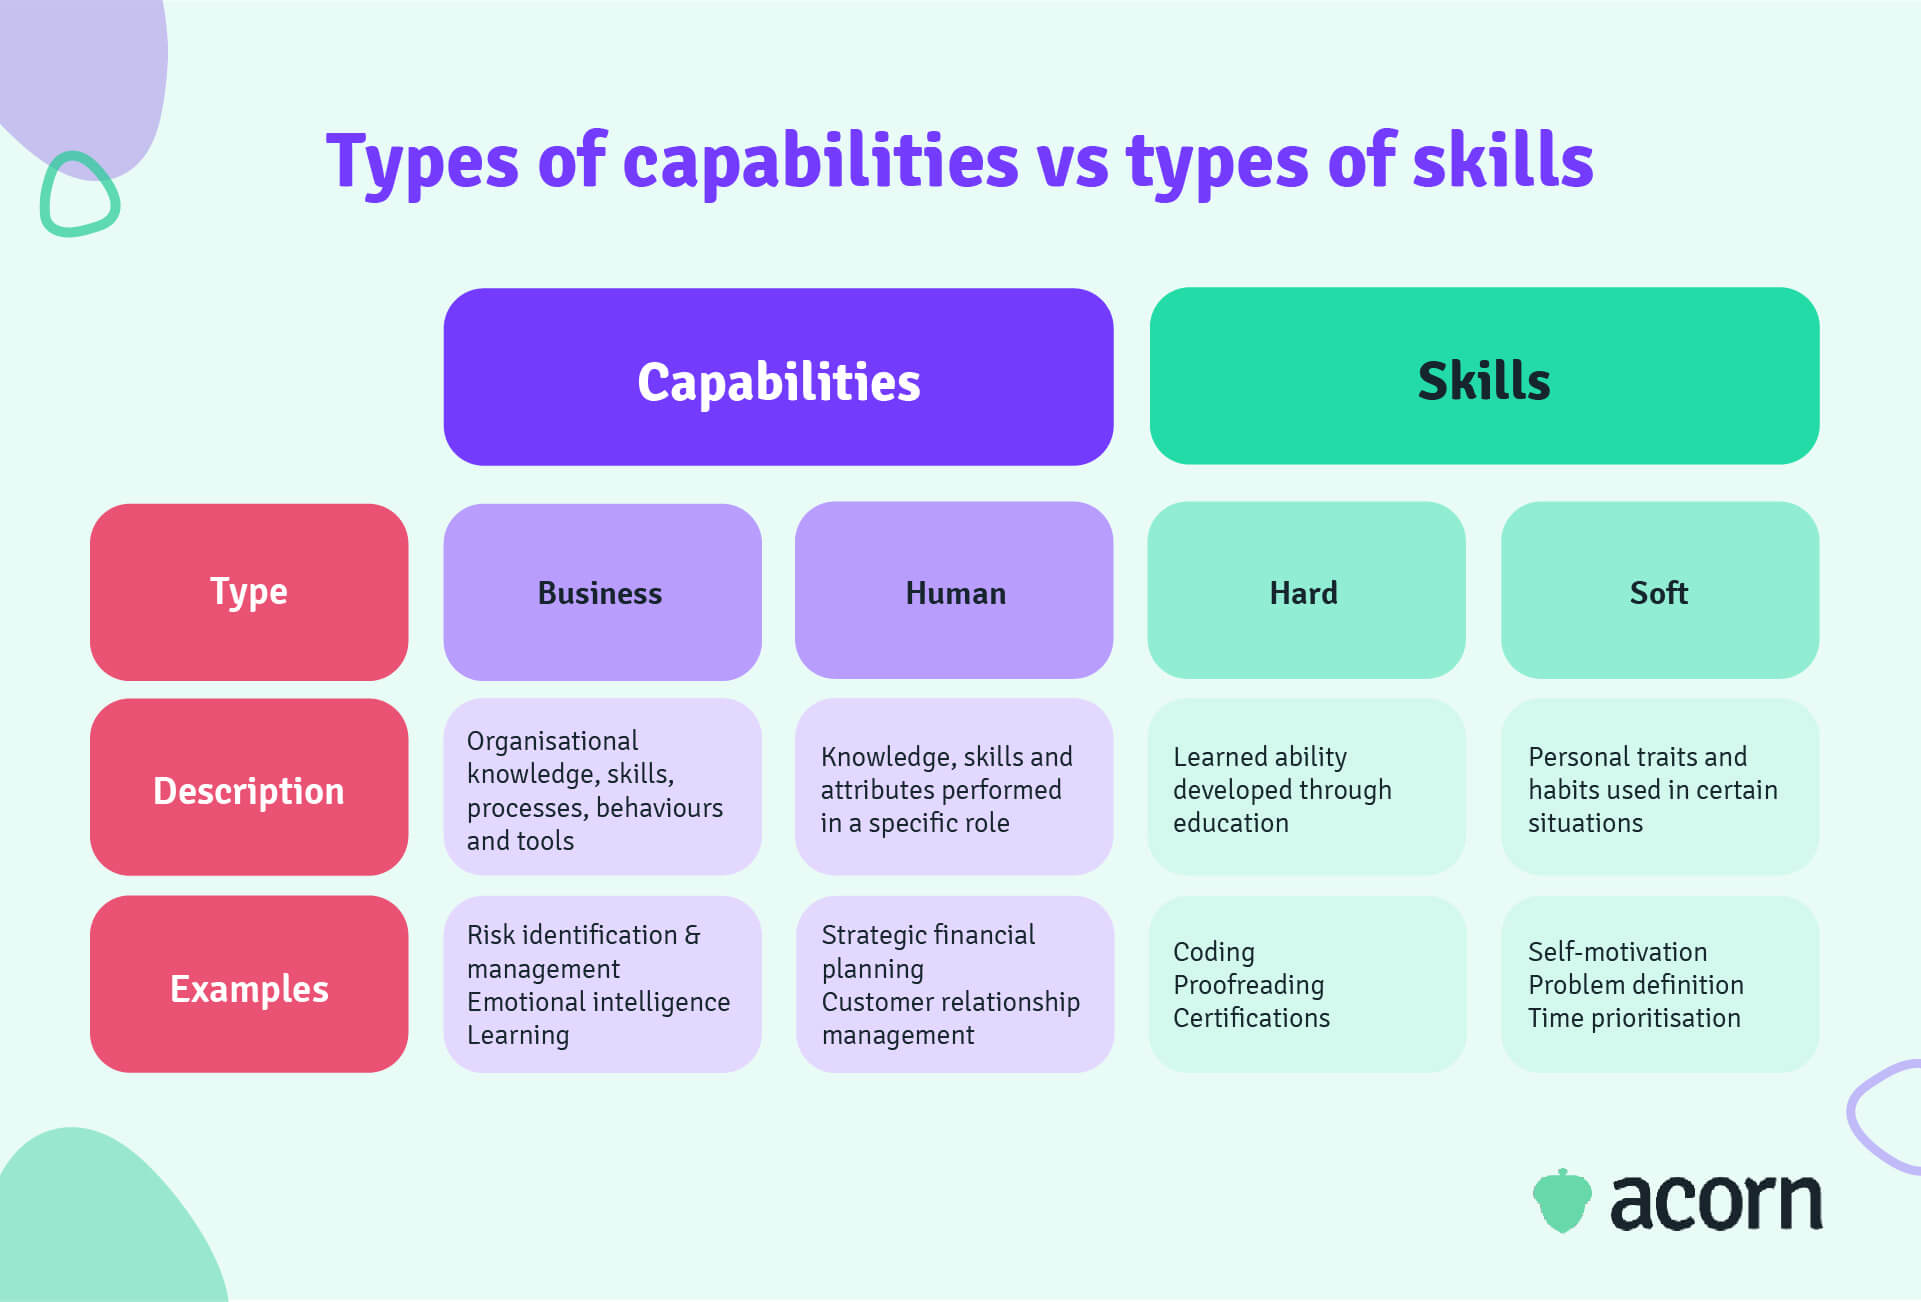 Table showing the difference in types, applications and examples between capabilities and skills